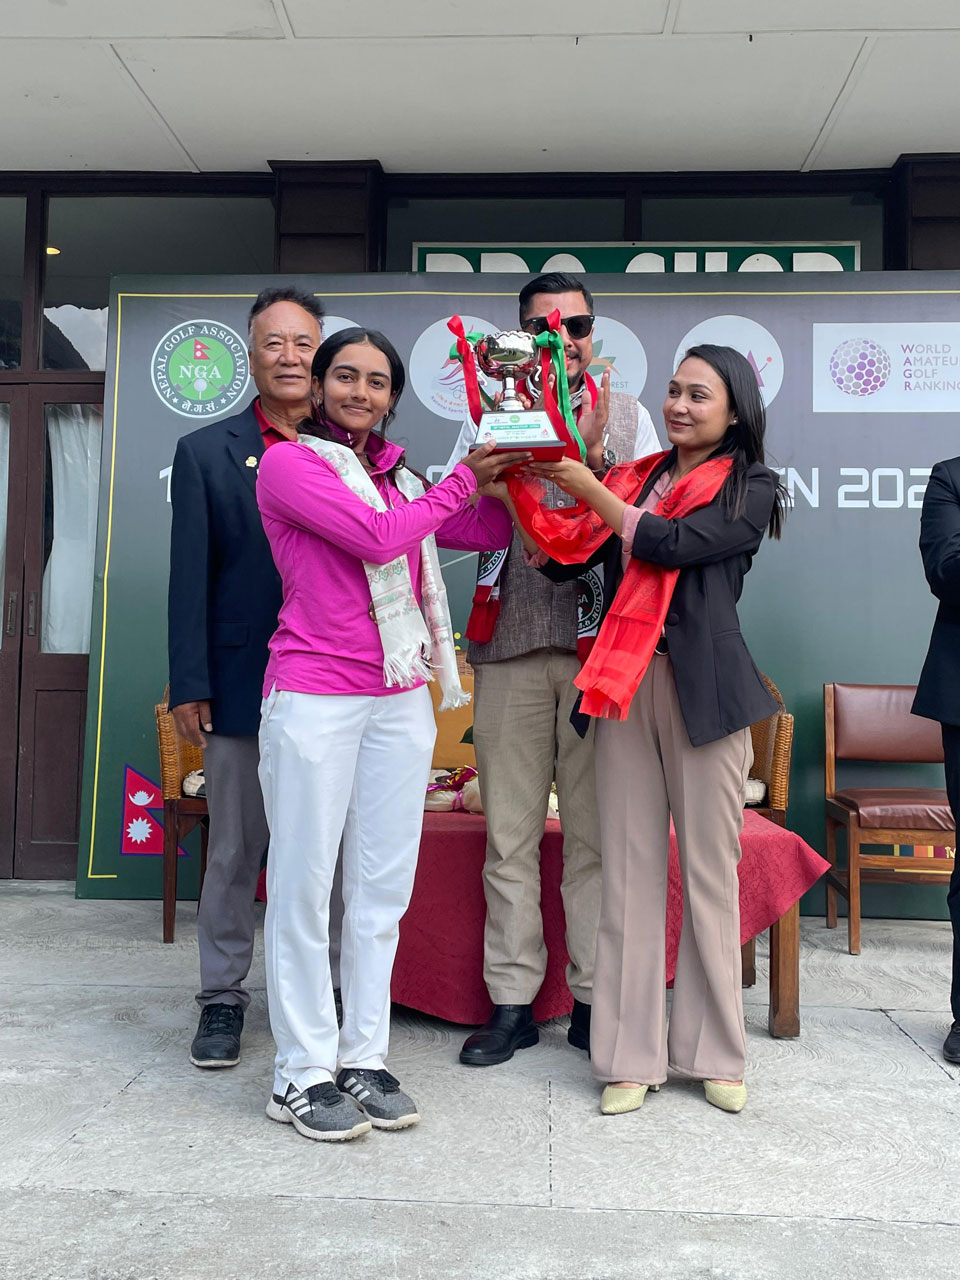 Ananthi Vivek finished as 2nd runner up at the 10th Nepal Amateur Golf Championship in the Ladies category held at Gokarna Forest Resort, Kathmandu.